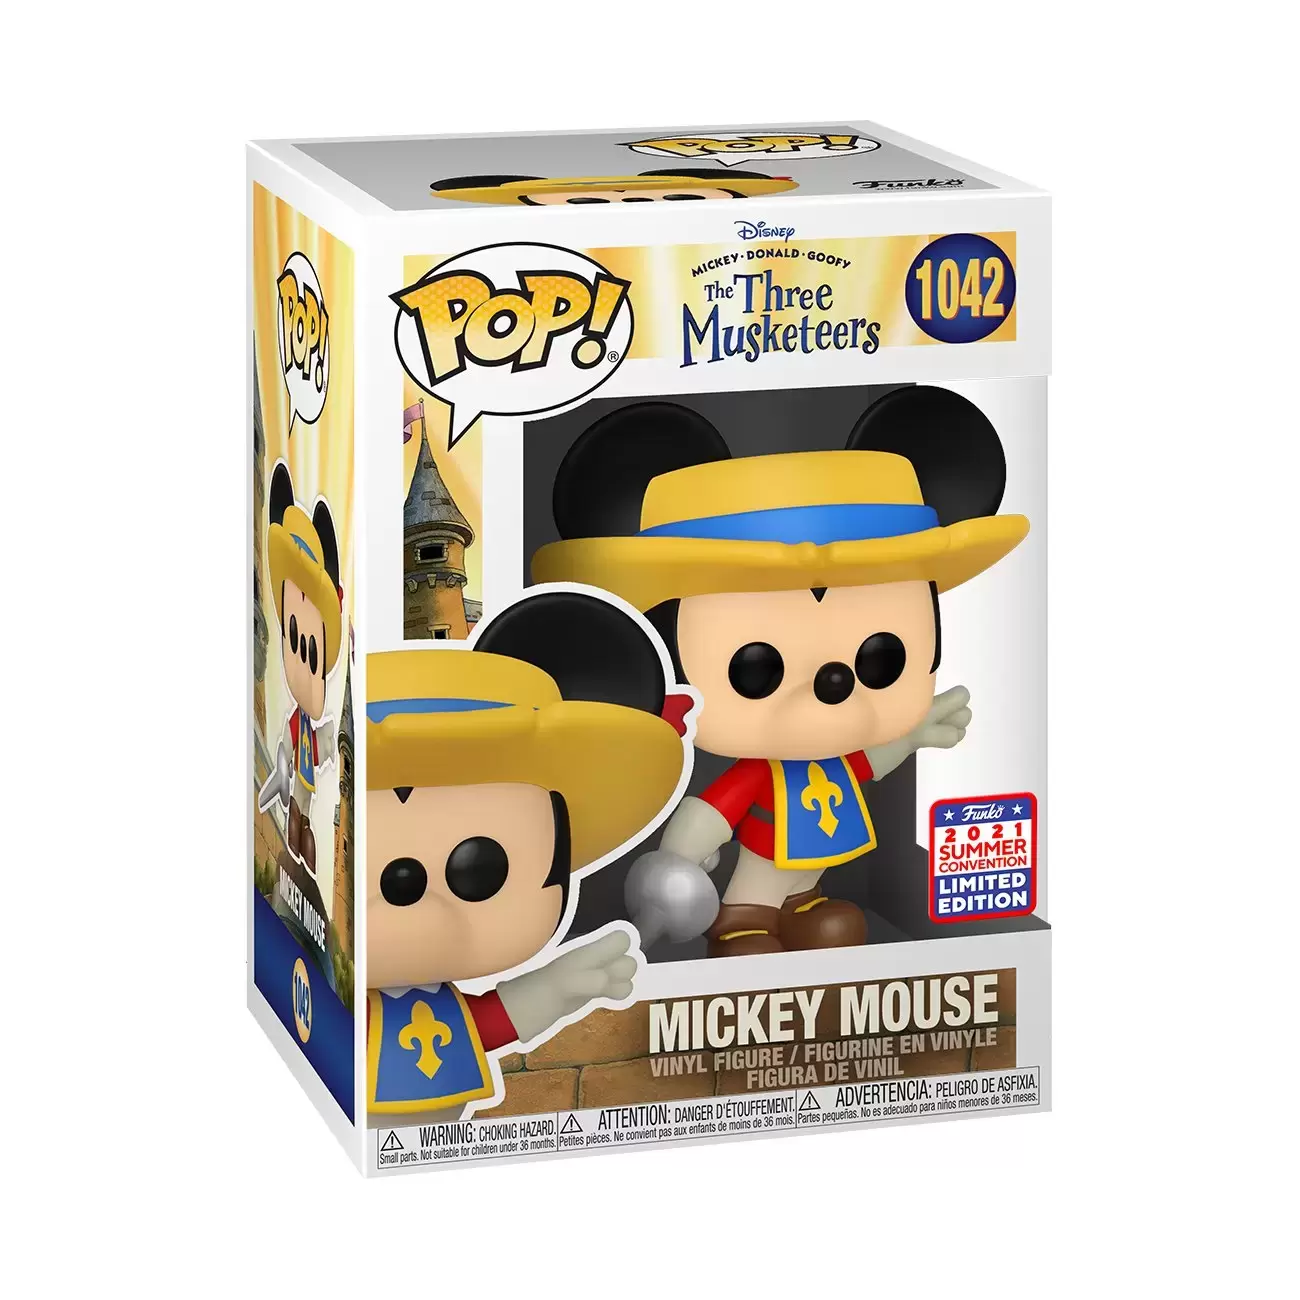 POP! Disney - The Three Musketeers - Mickey Mouse